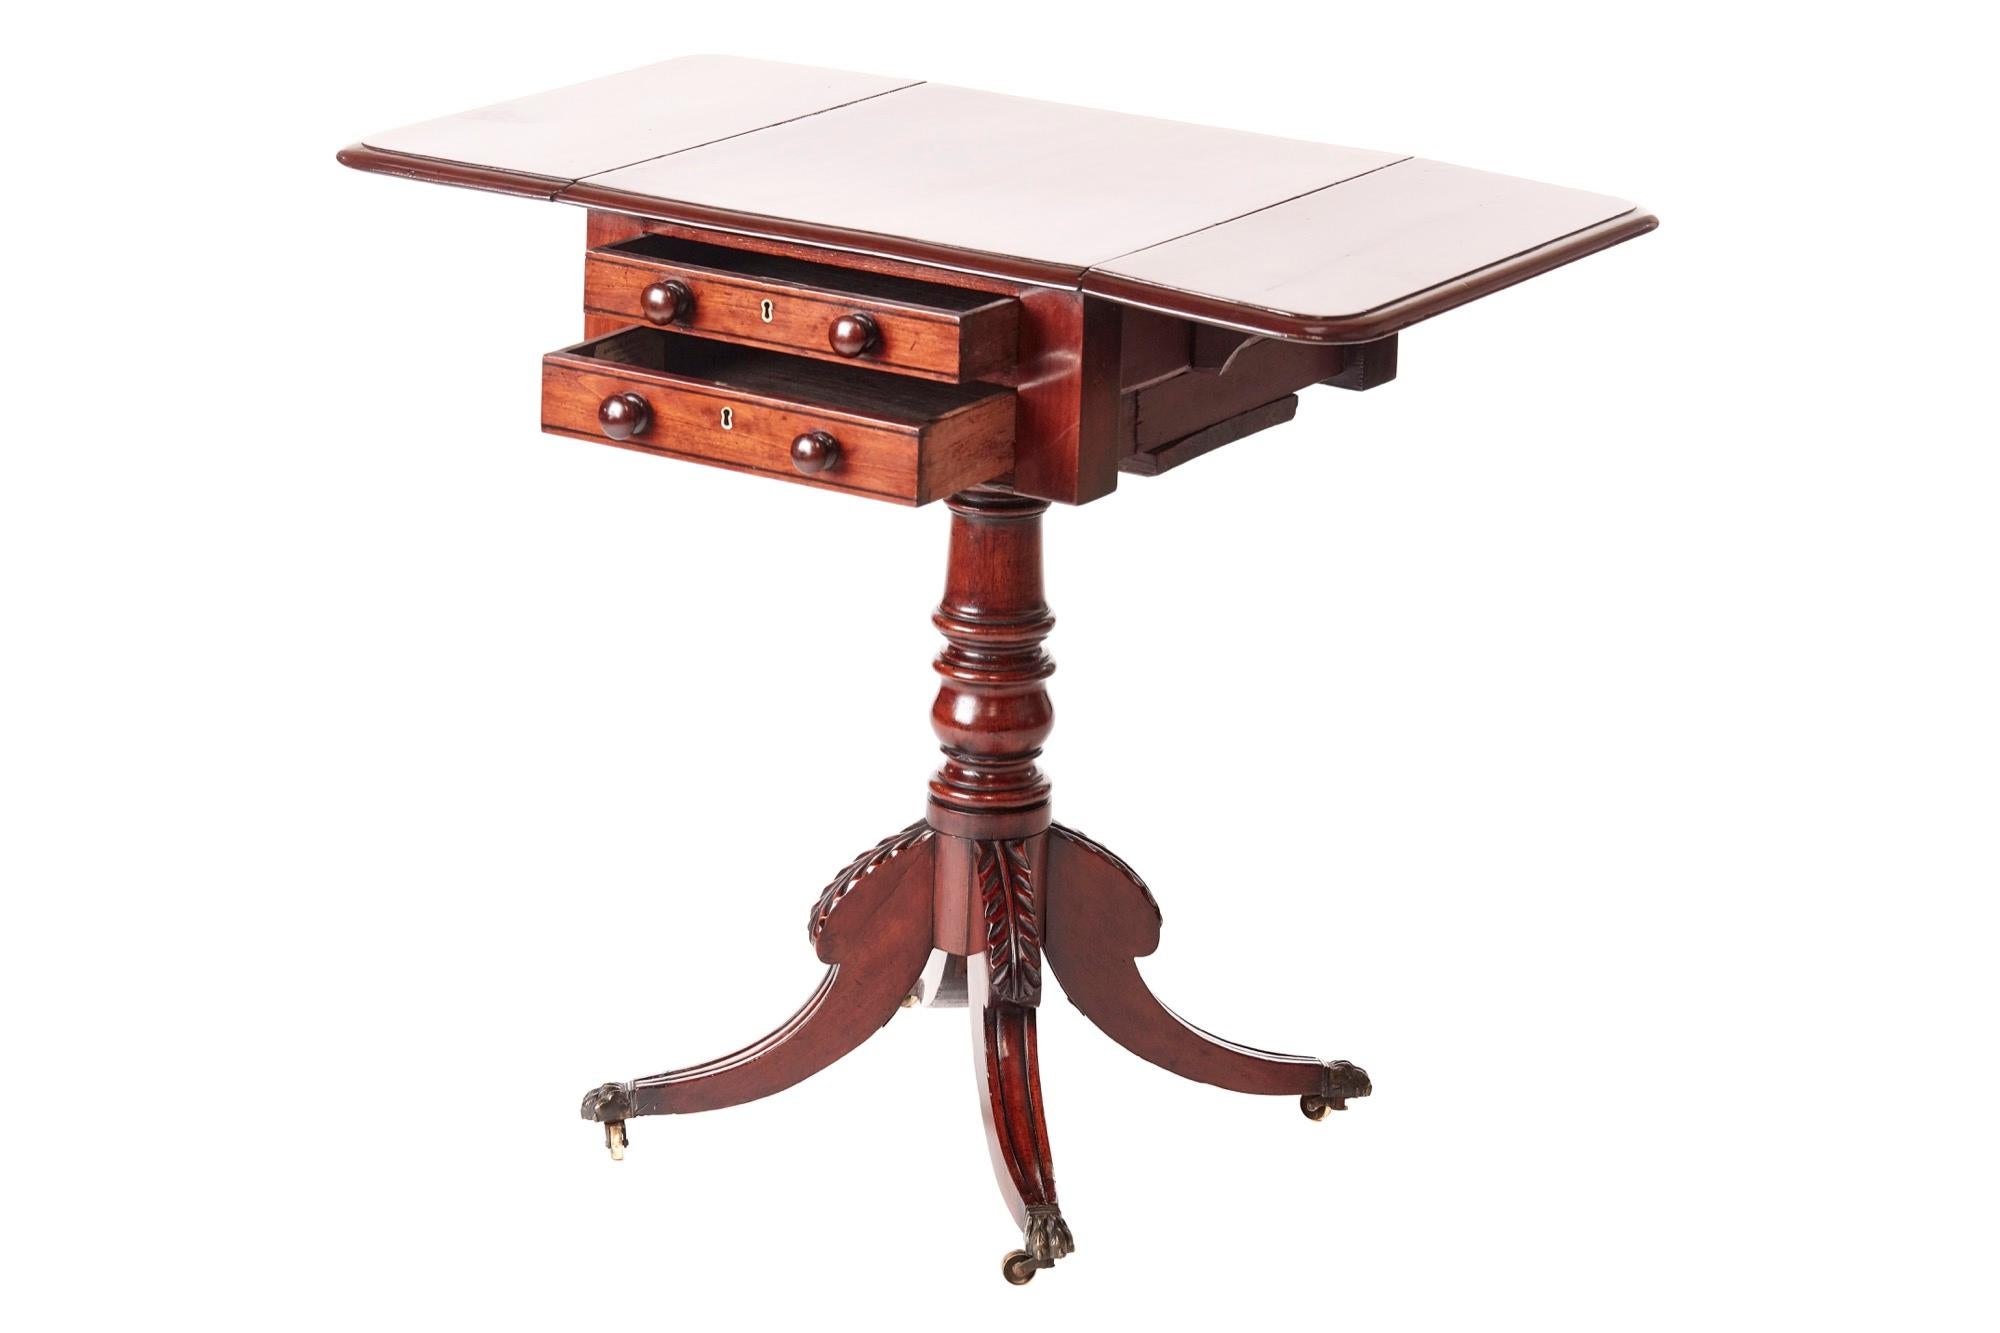 Quality Regency mahogany drop leaf lamp table, having a lovely quality mahogany top with two drop leaves, two drawers with original turned mahogany knobs, supported by a solid mahogany turned column, raised on four carved reeded sabred legs